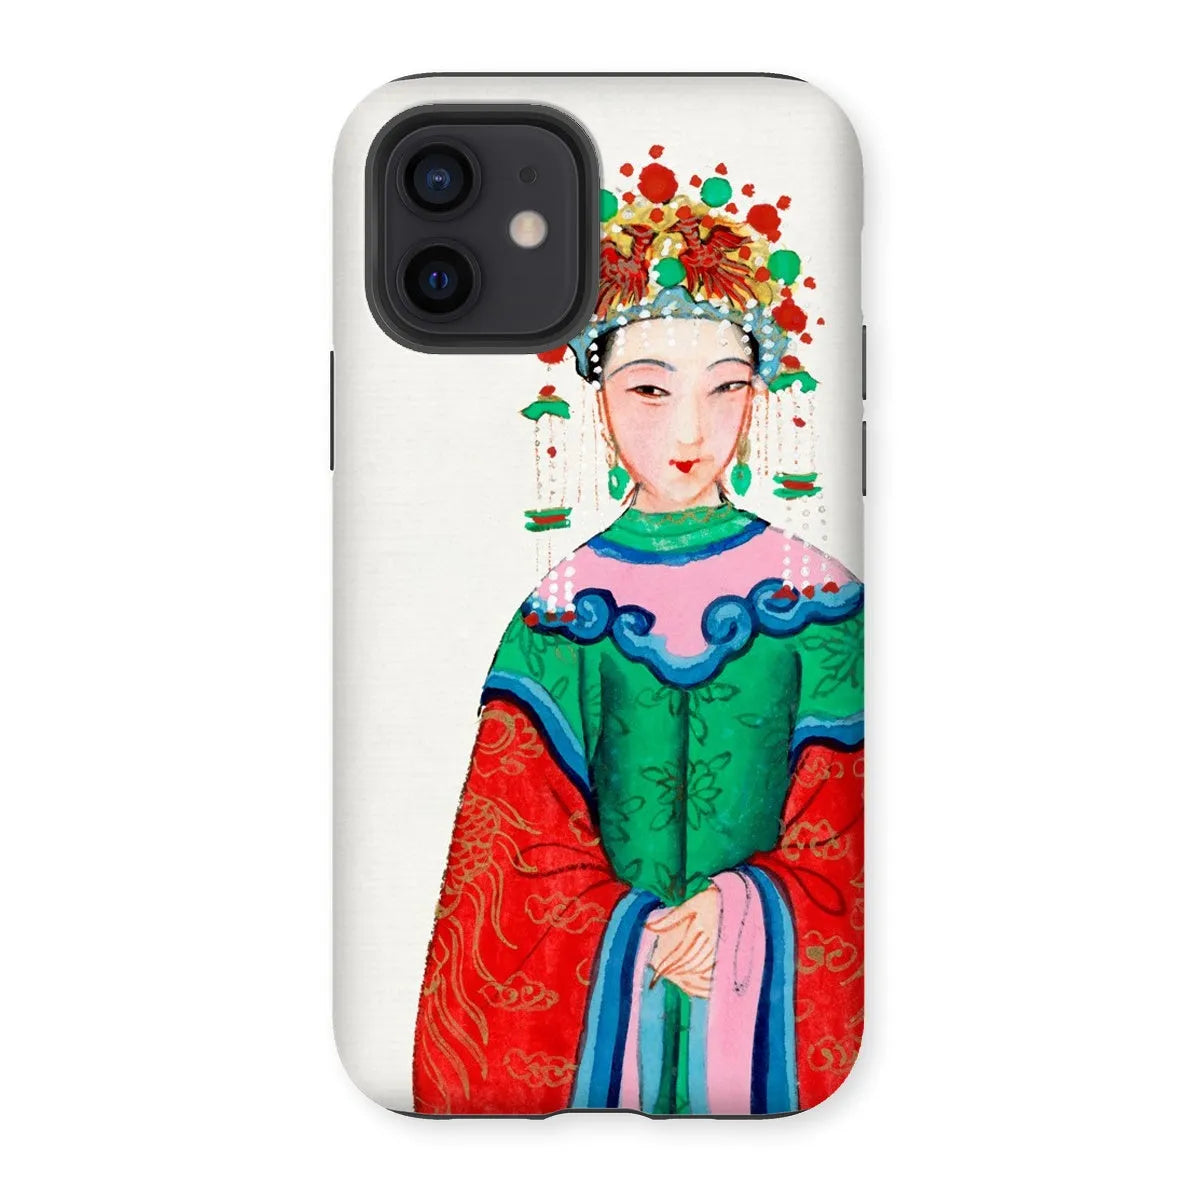 Imperial Princess - Chinese Aesthetic Painting Phone Case - Iphone 12 / Matte - Mobile Phone Cases - Aesthetic Art